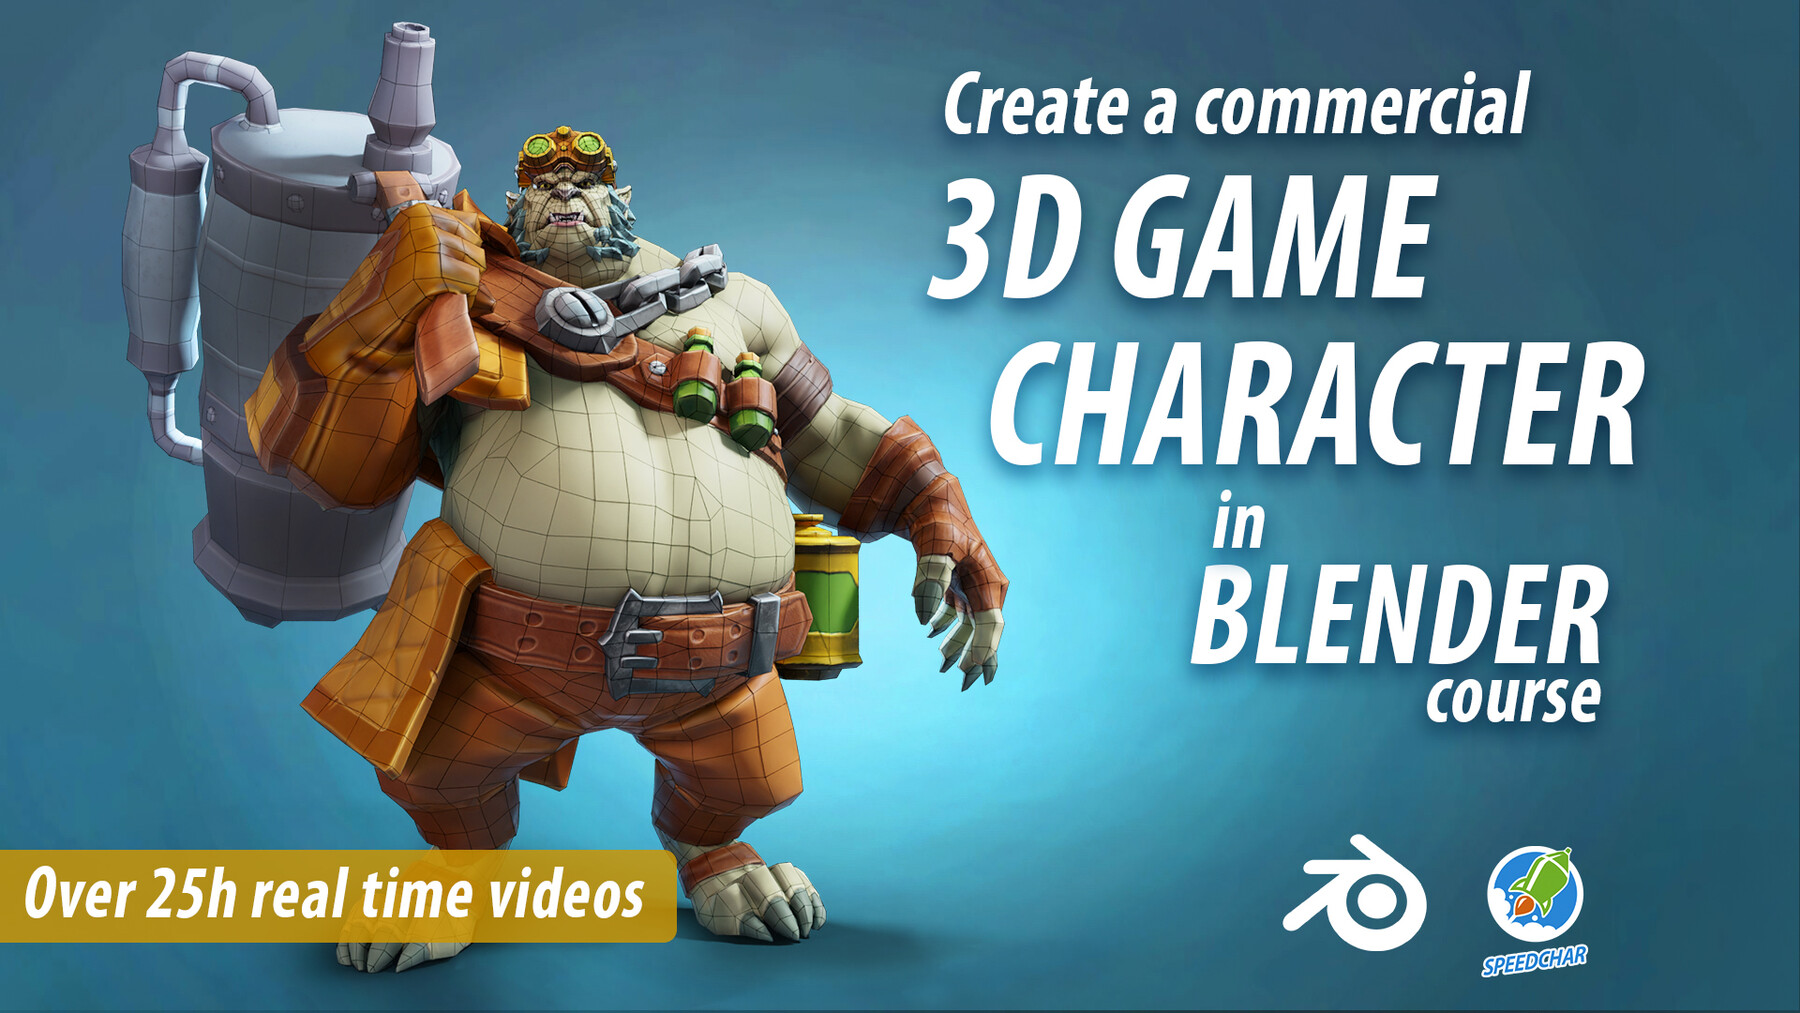 - Create a commercial 3D Character in Blender full course | Tutorials